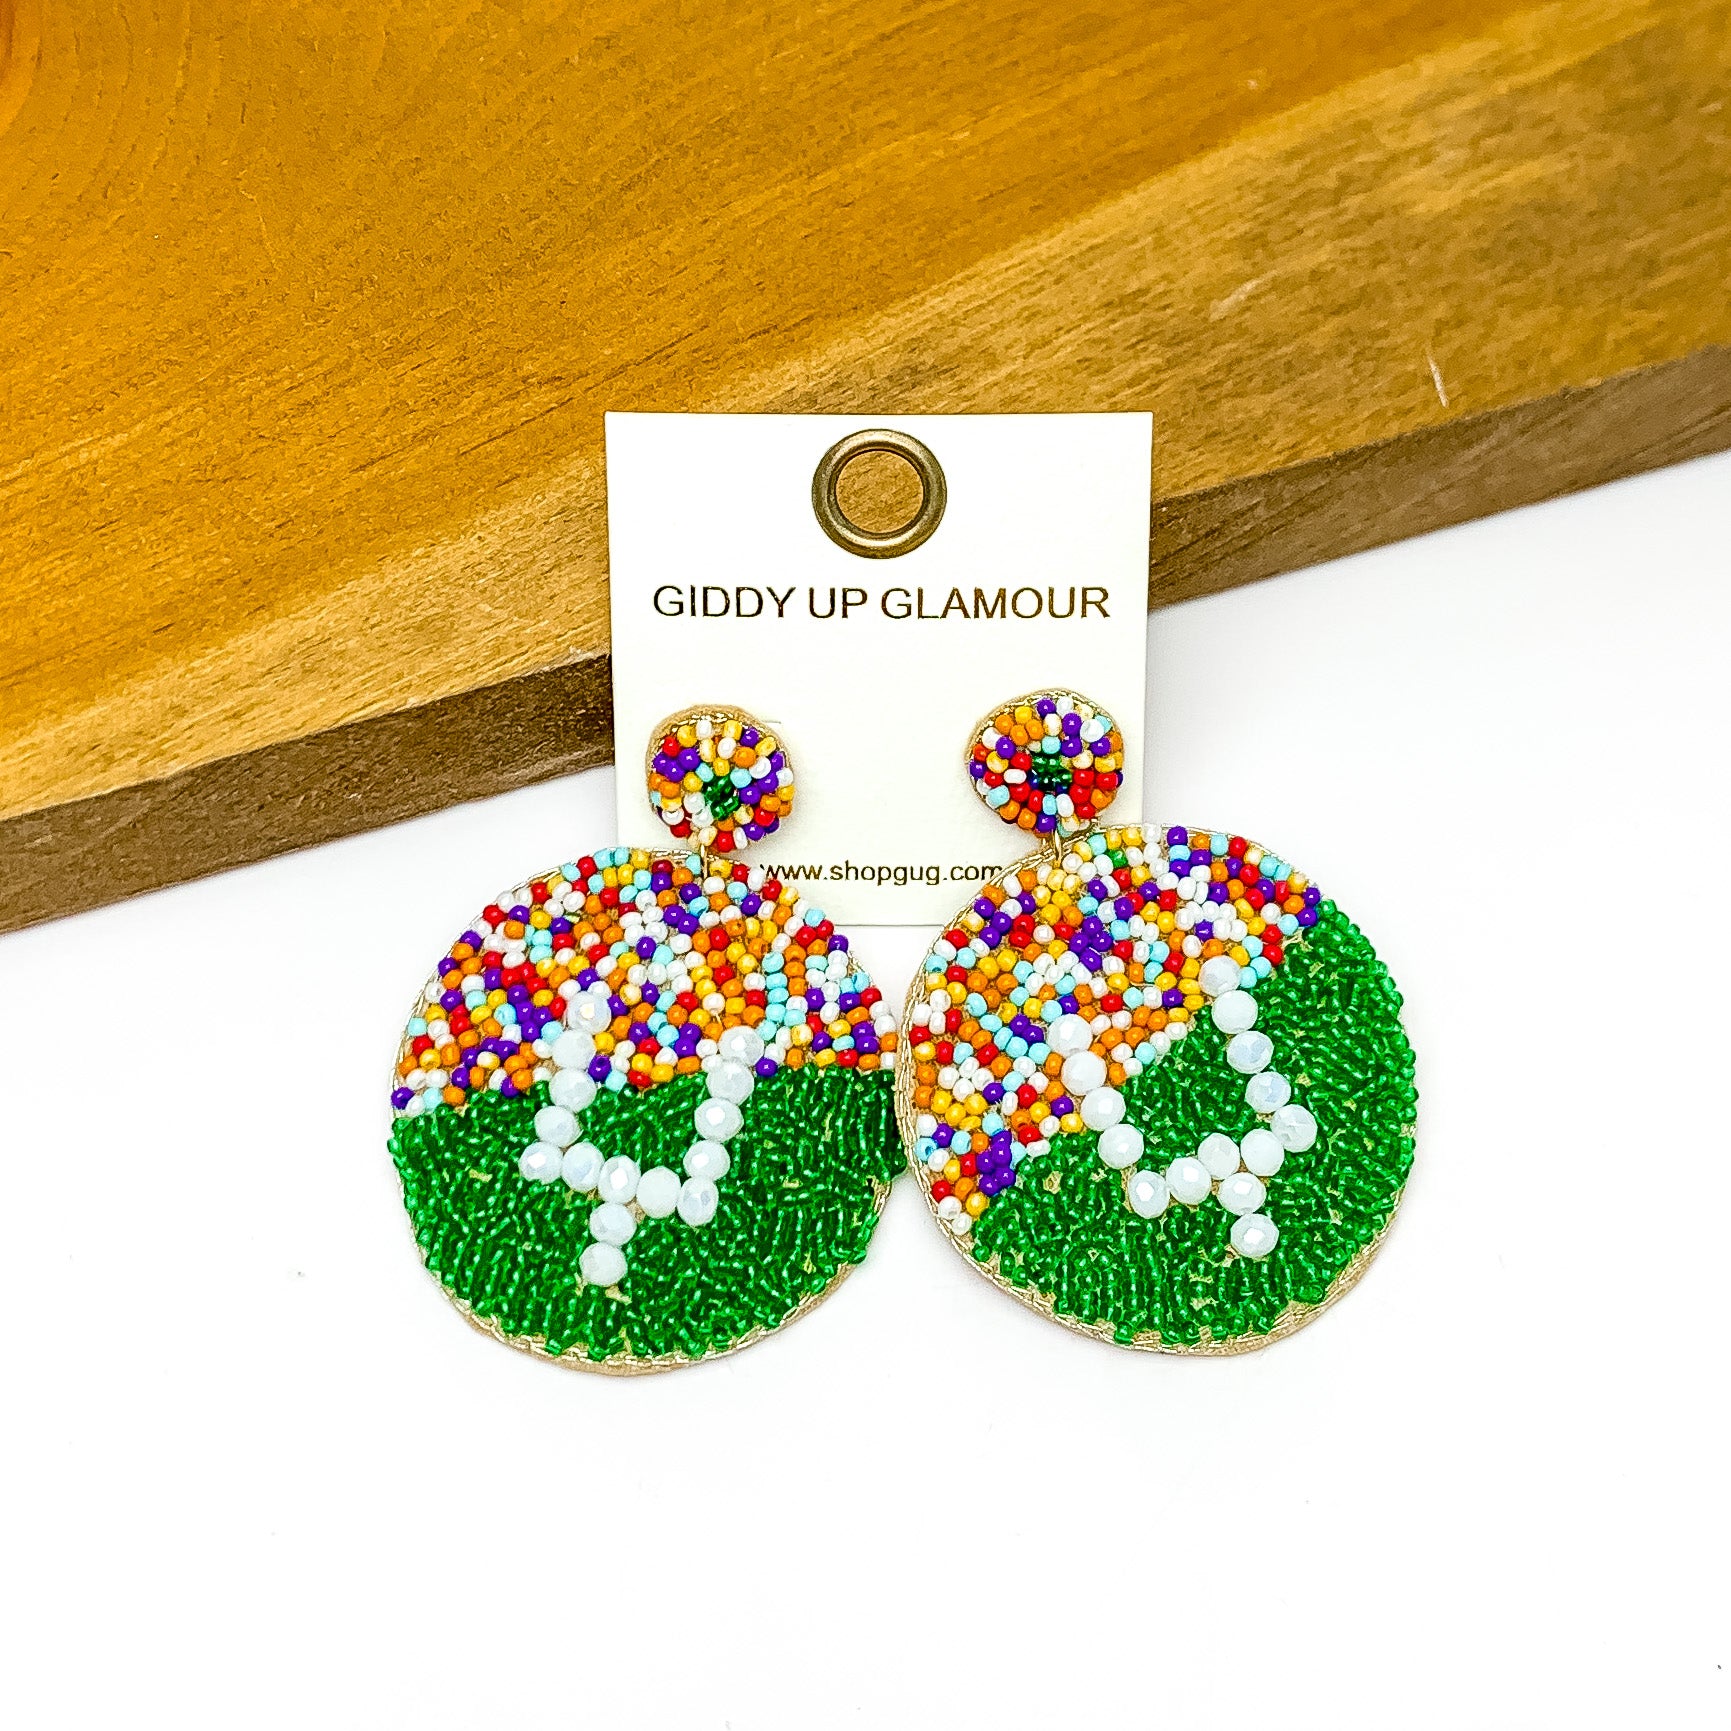 Football Stadium With Field Goal Circular Post Beaded Earrings in Multicolor. Pictured against a wood piece on a white background.